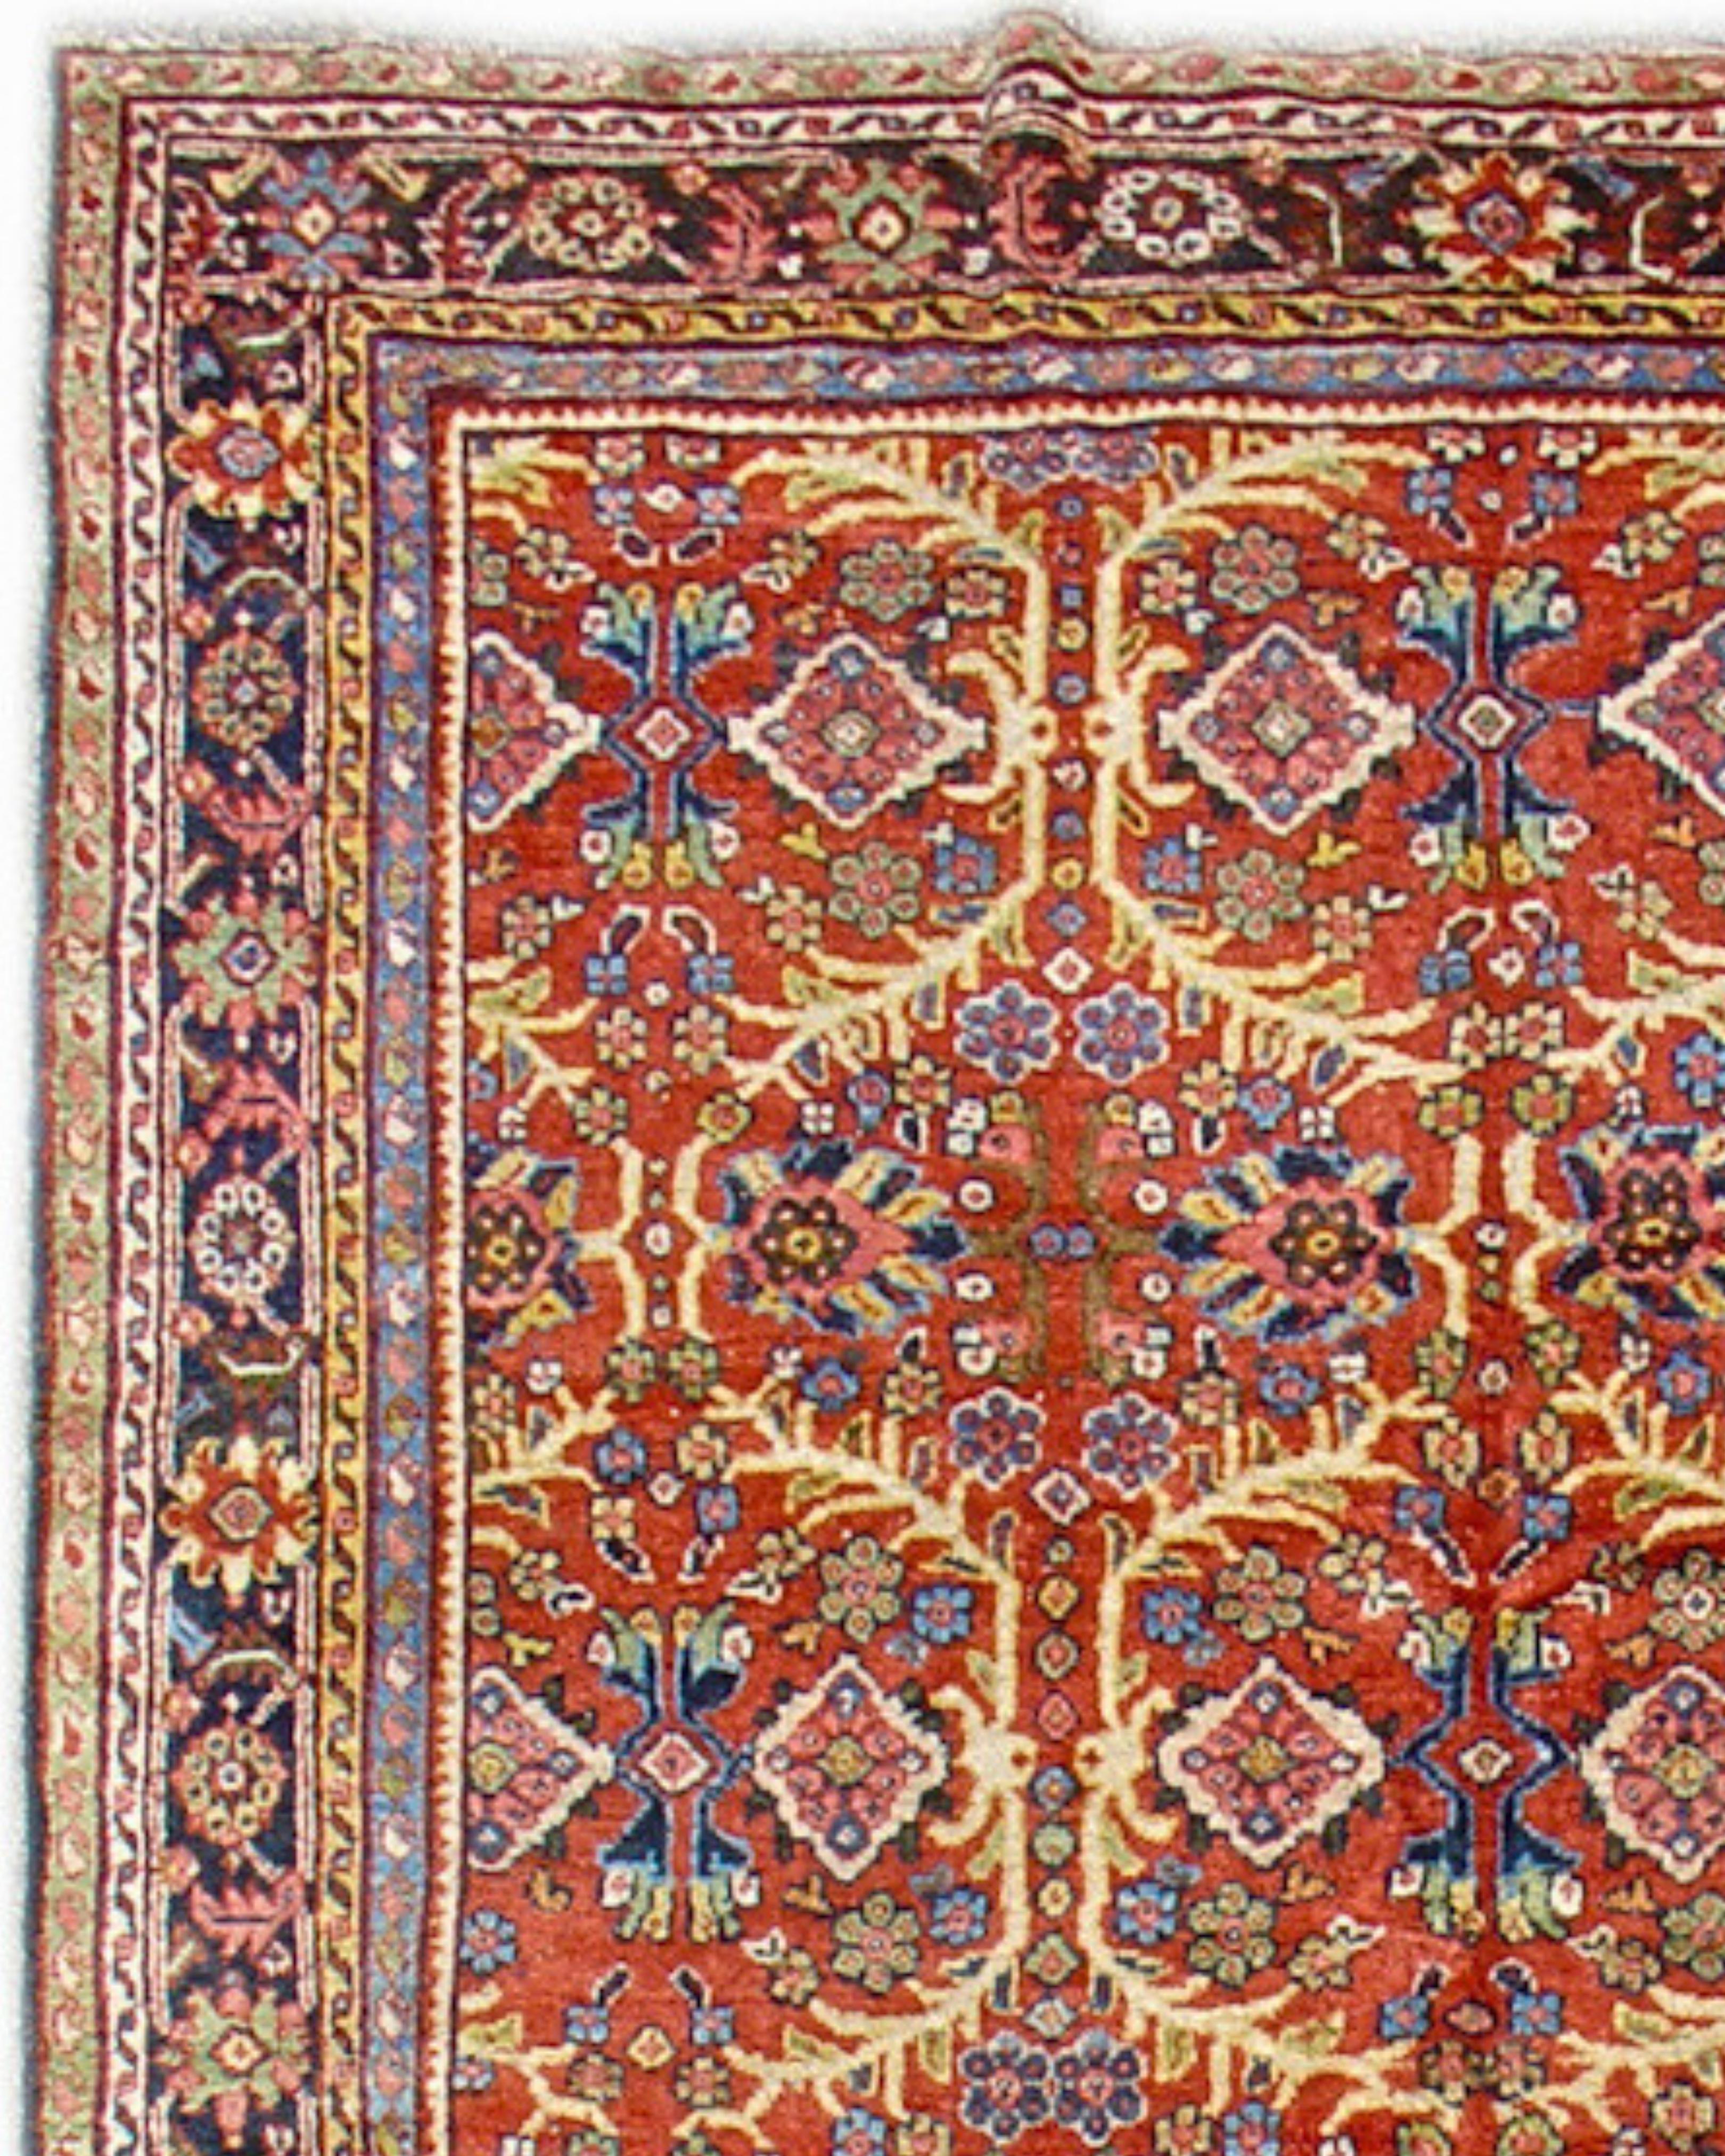 Hand-Woven Antique Persian Mahal Rug, 19th Century For Sale